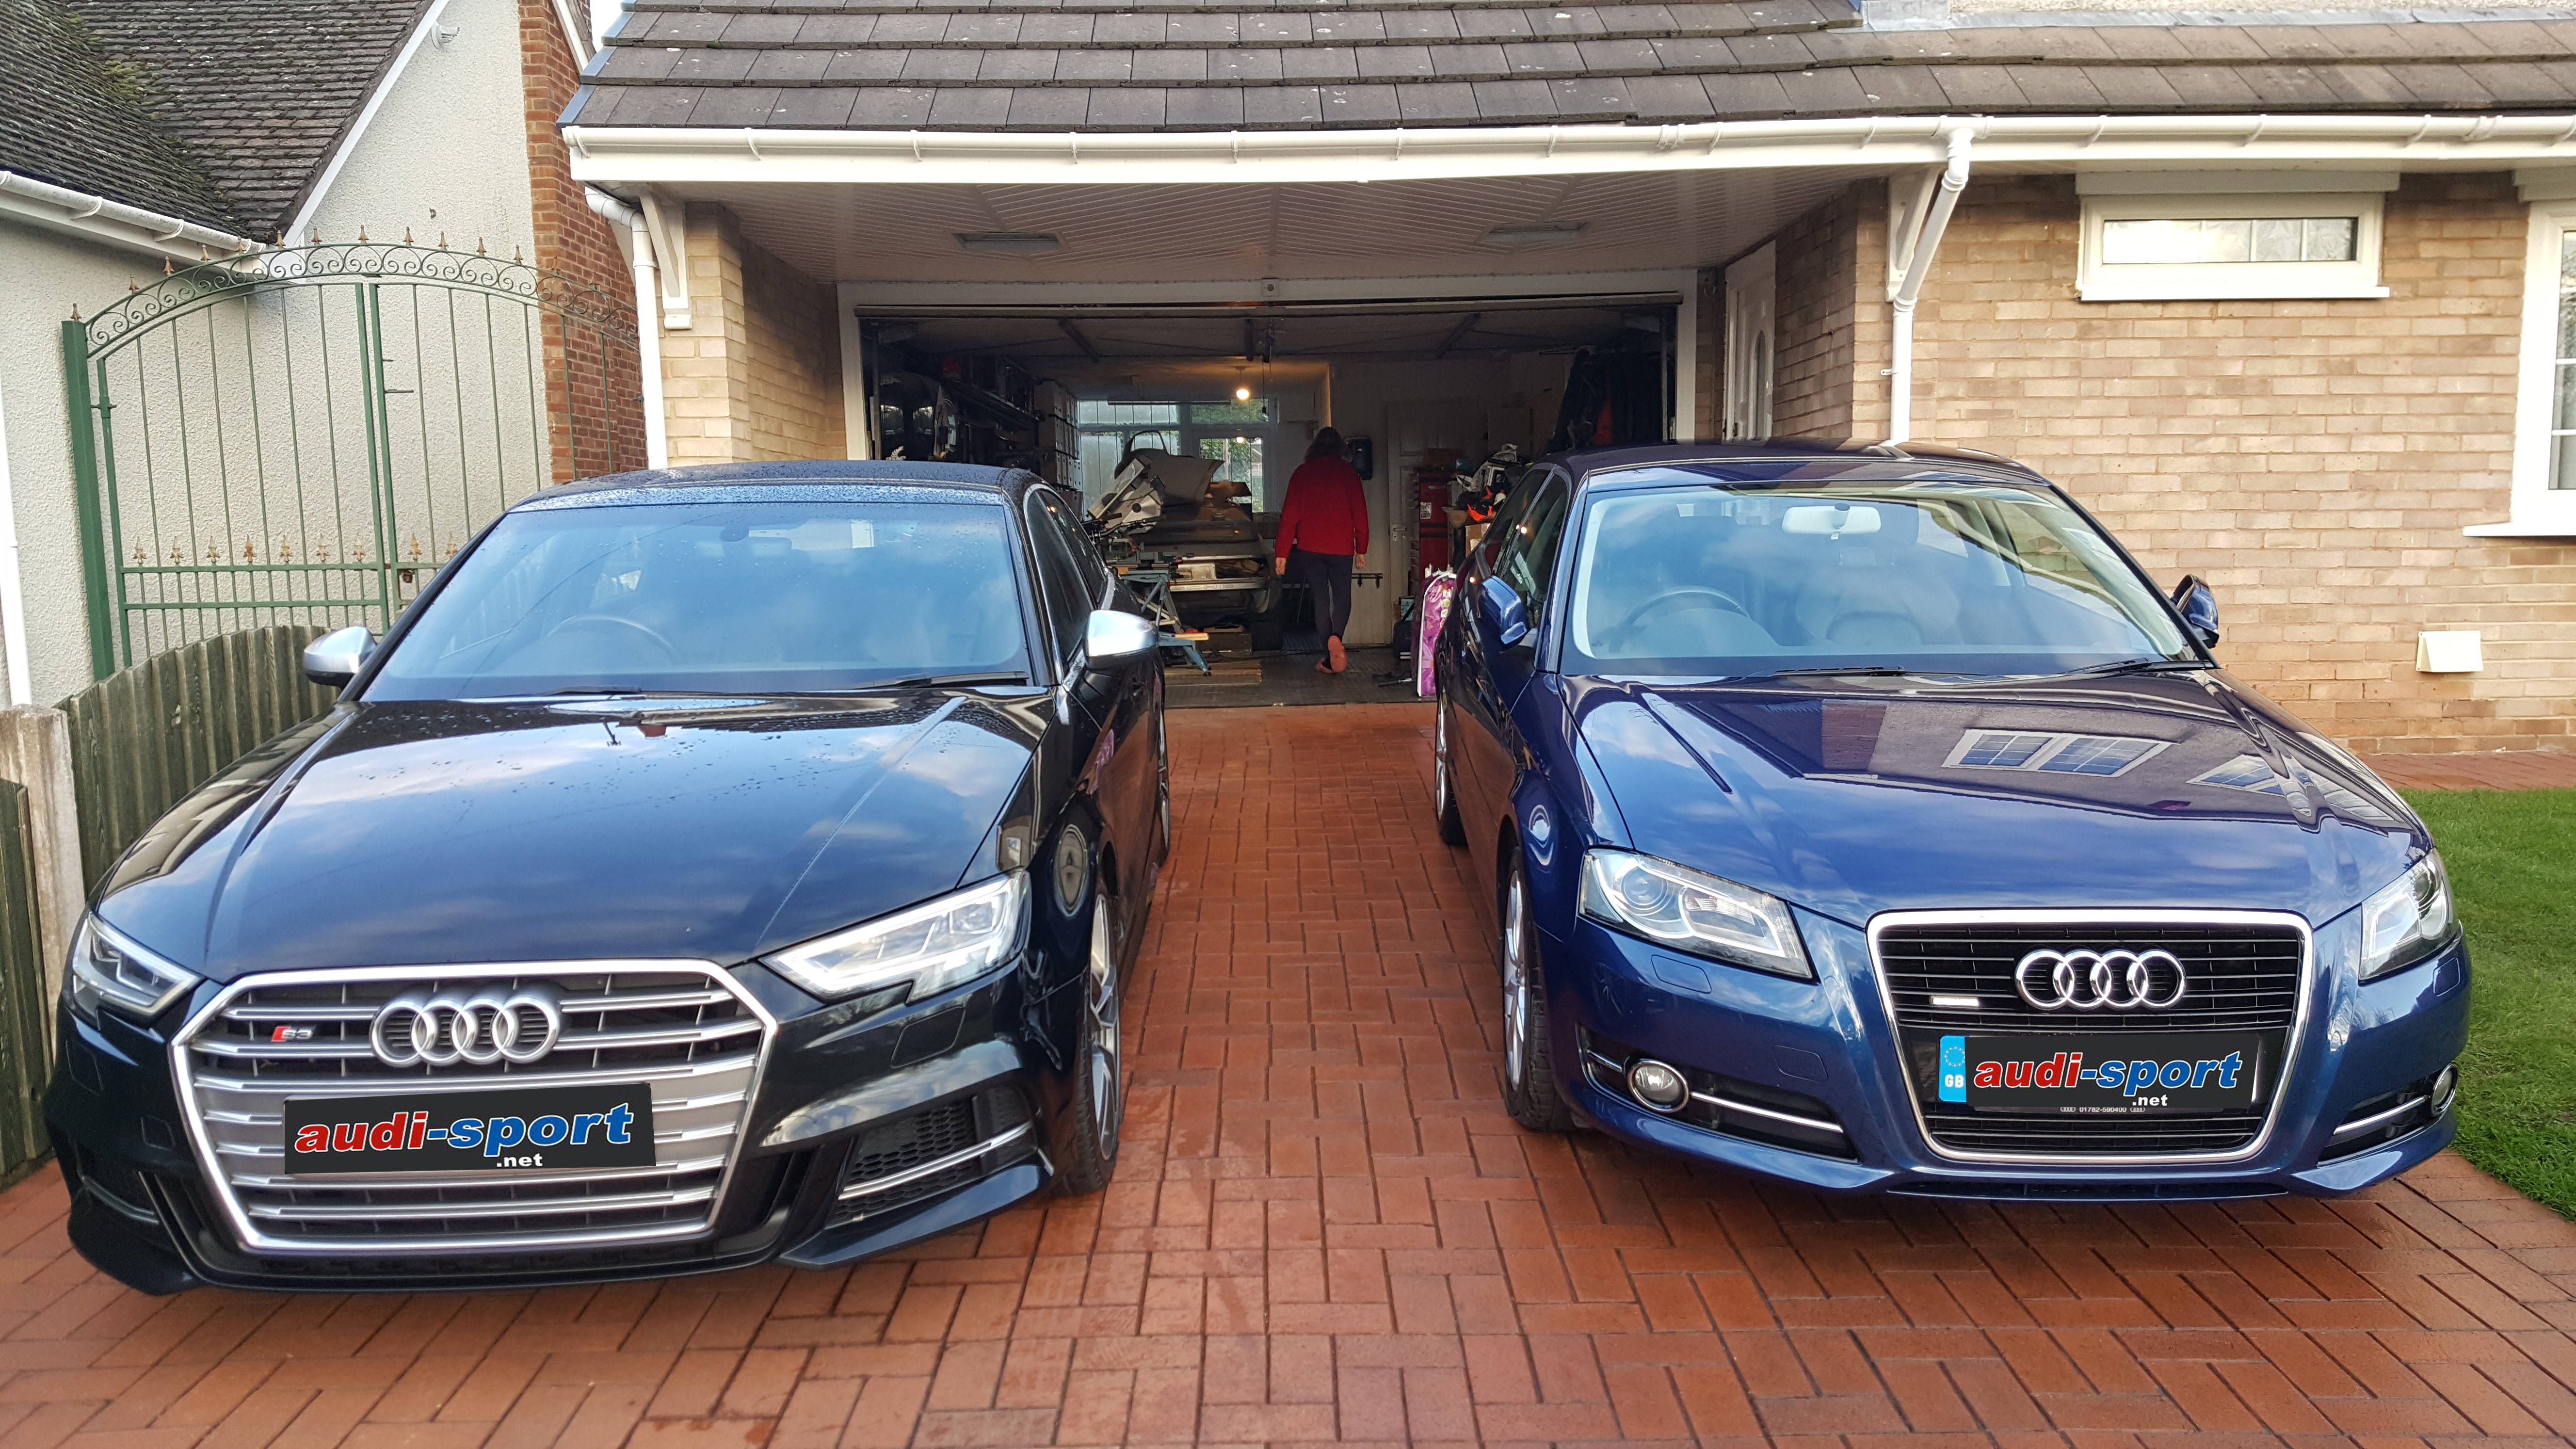 His and her A3s